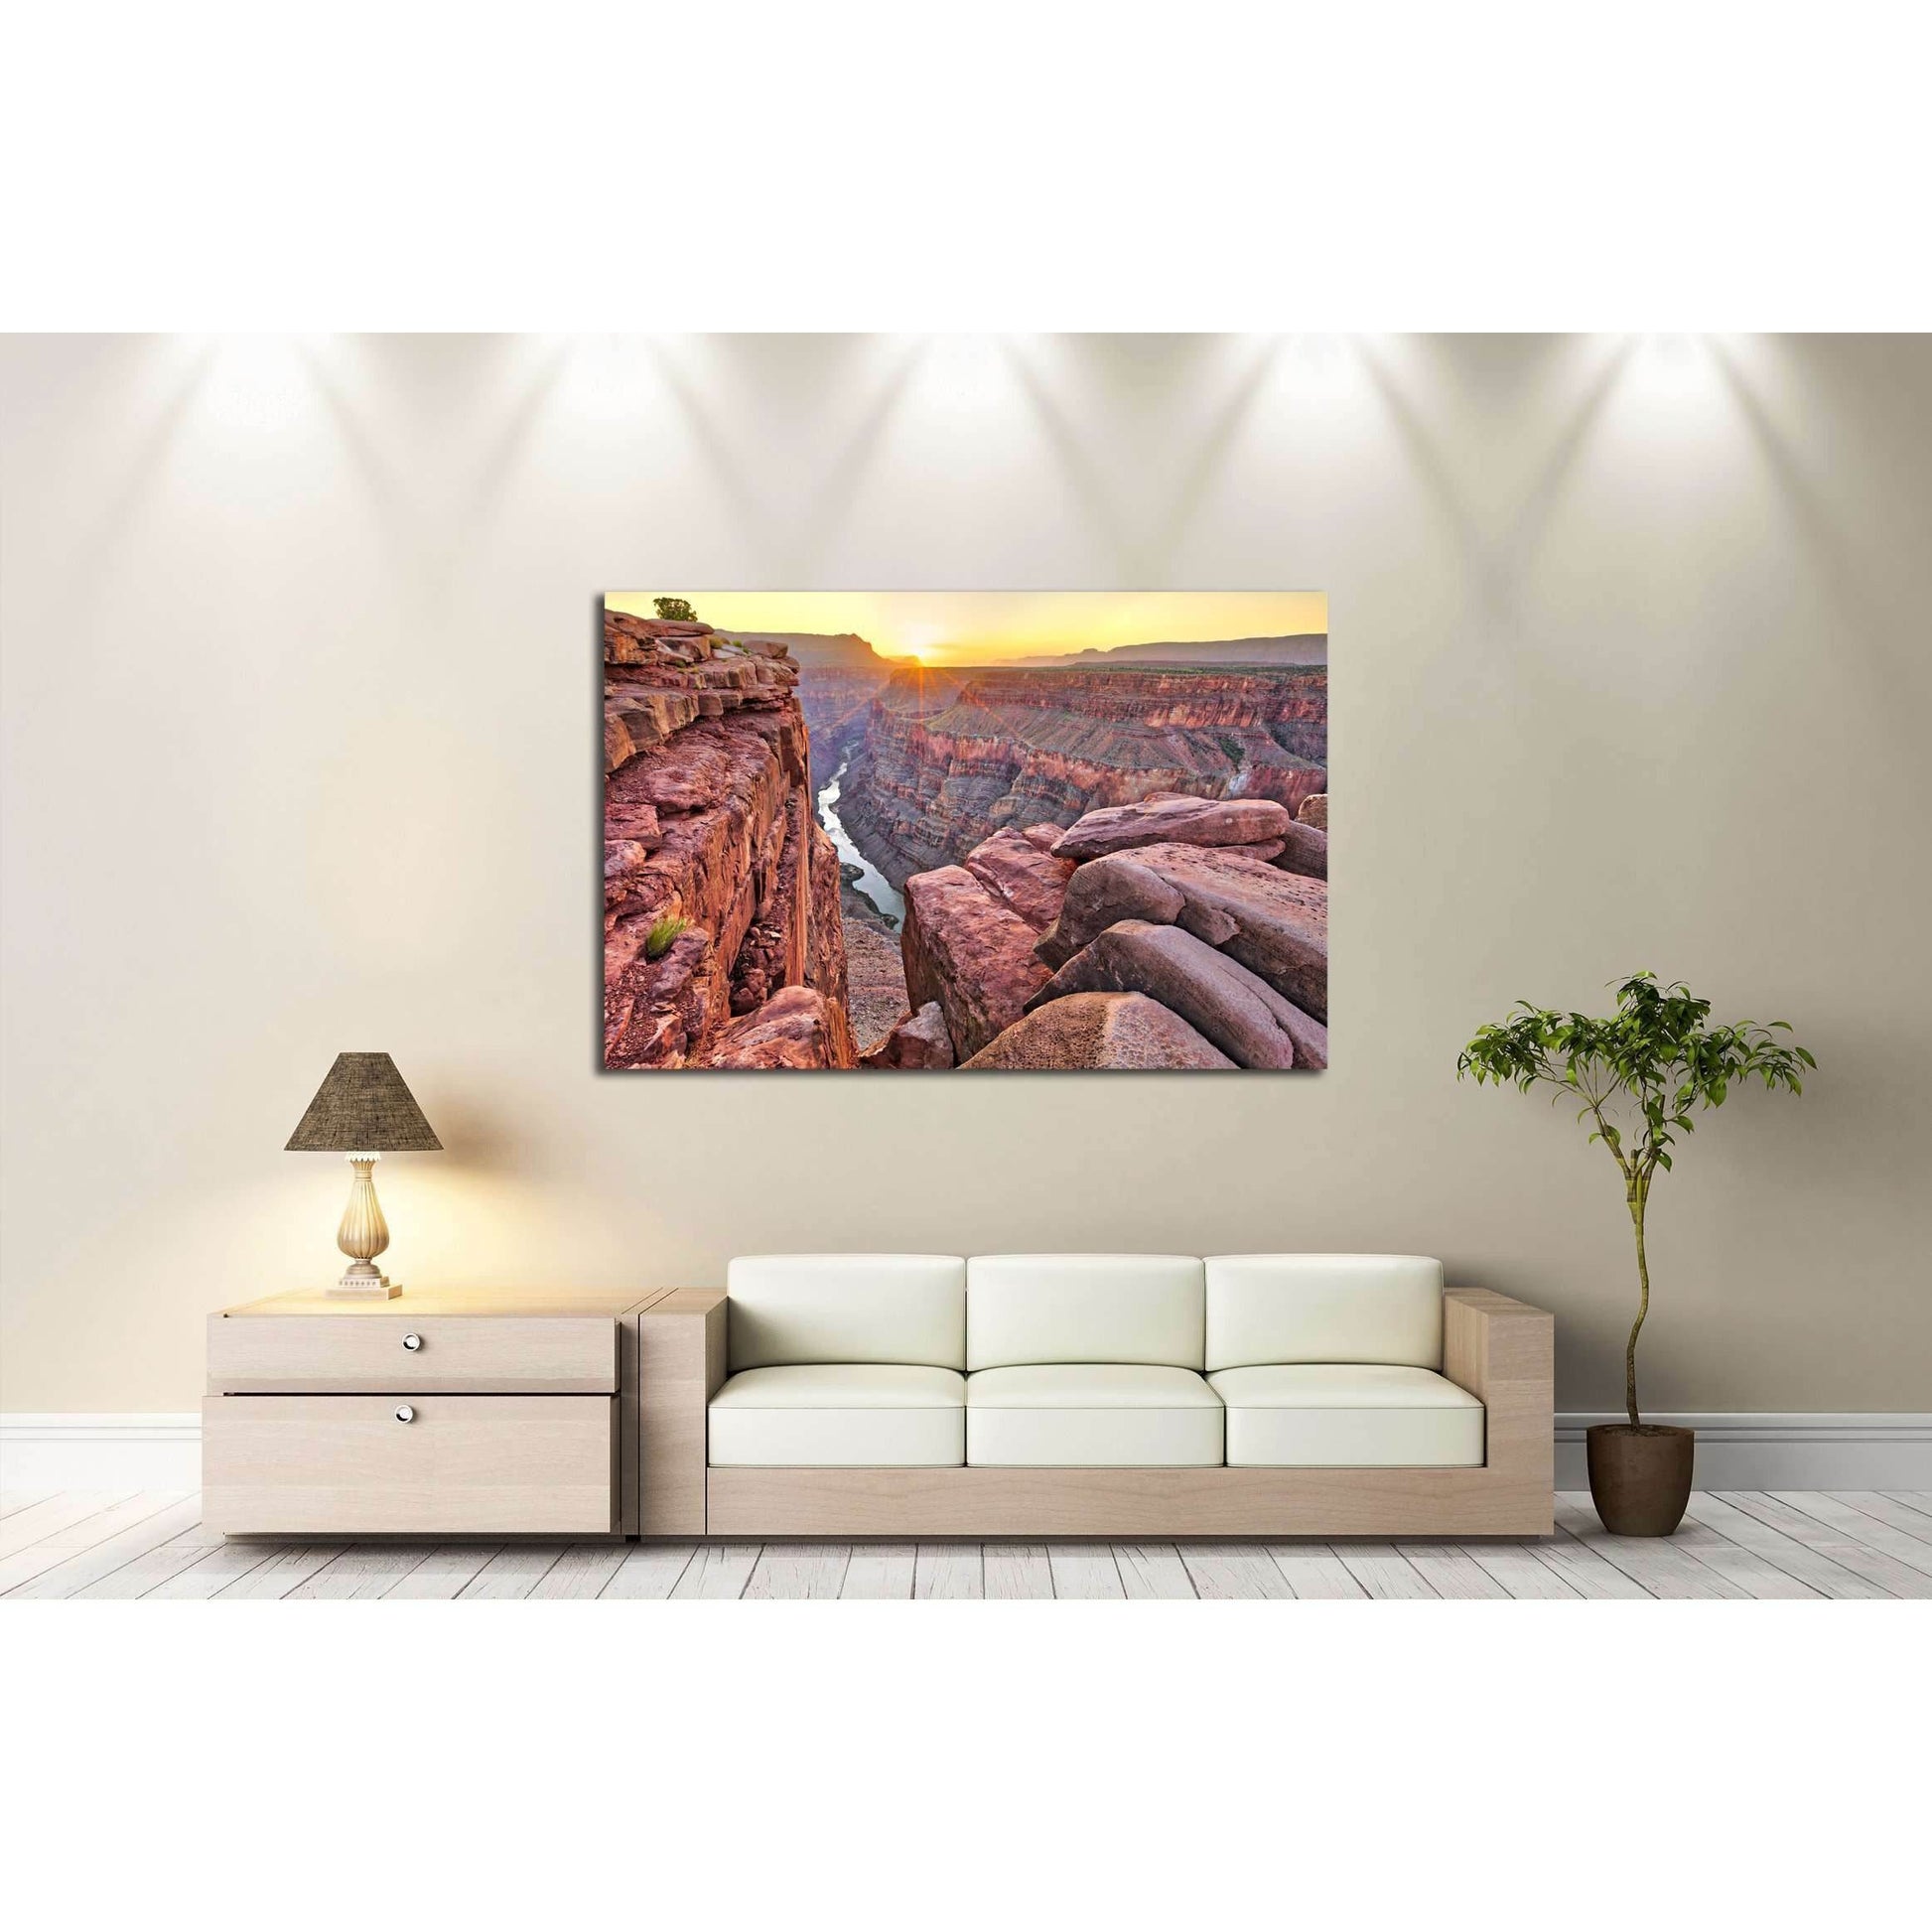 Sunrise at Toroweap in Grand Canyon National Park №3116 Ready to Hang Canvas PrintThis striking multi-panel canvas print displays the grandeur of a canyon at sunrise. The warm sunlight bathes the rock formations in a golden hue, with the river winding thr